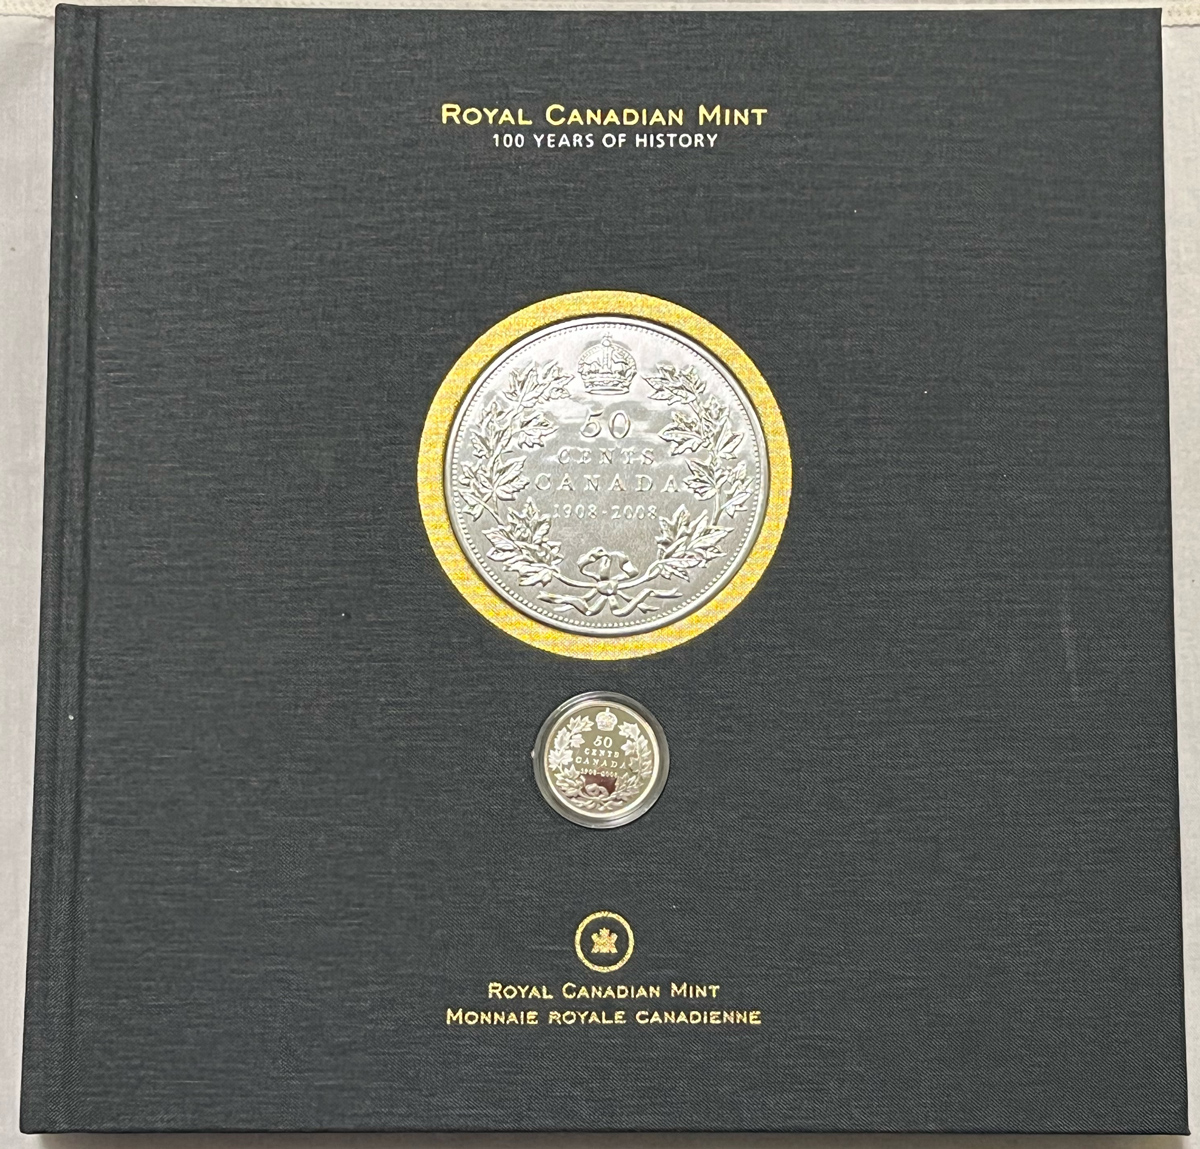 1998-2008 ROYAL CANADIAN MINT 100 YEARS OF HISTORY HARDBACK BOOK & 50C COIN  RARE - The Reeded Edge, Inc